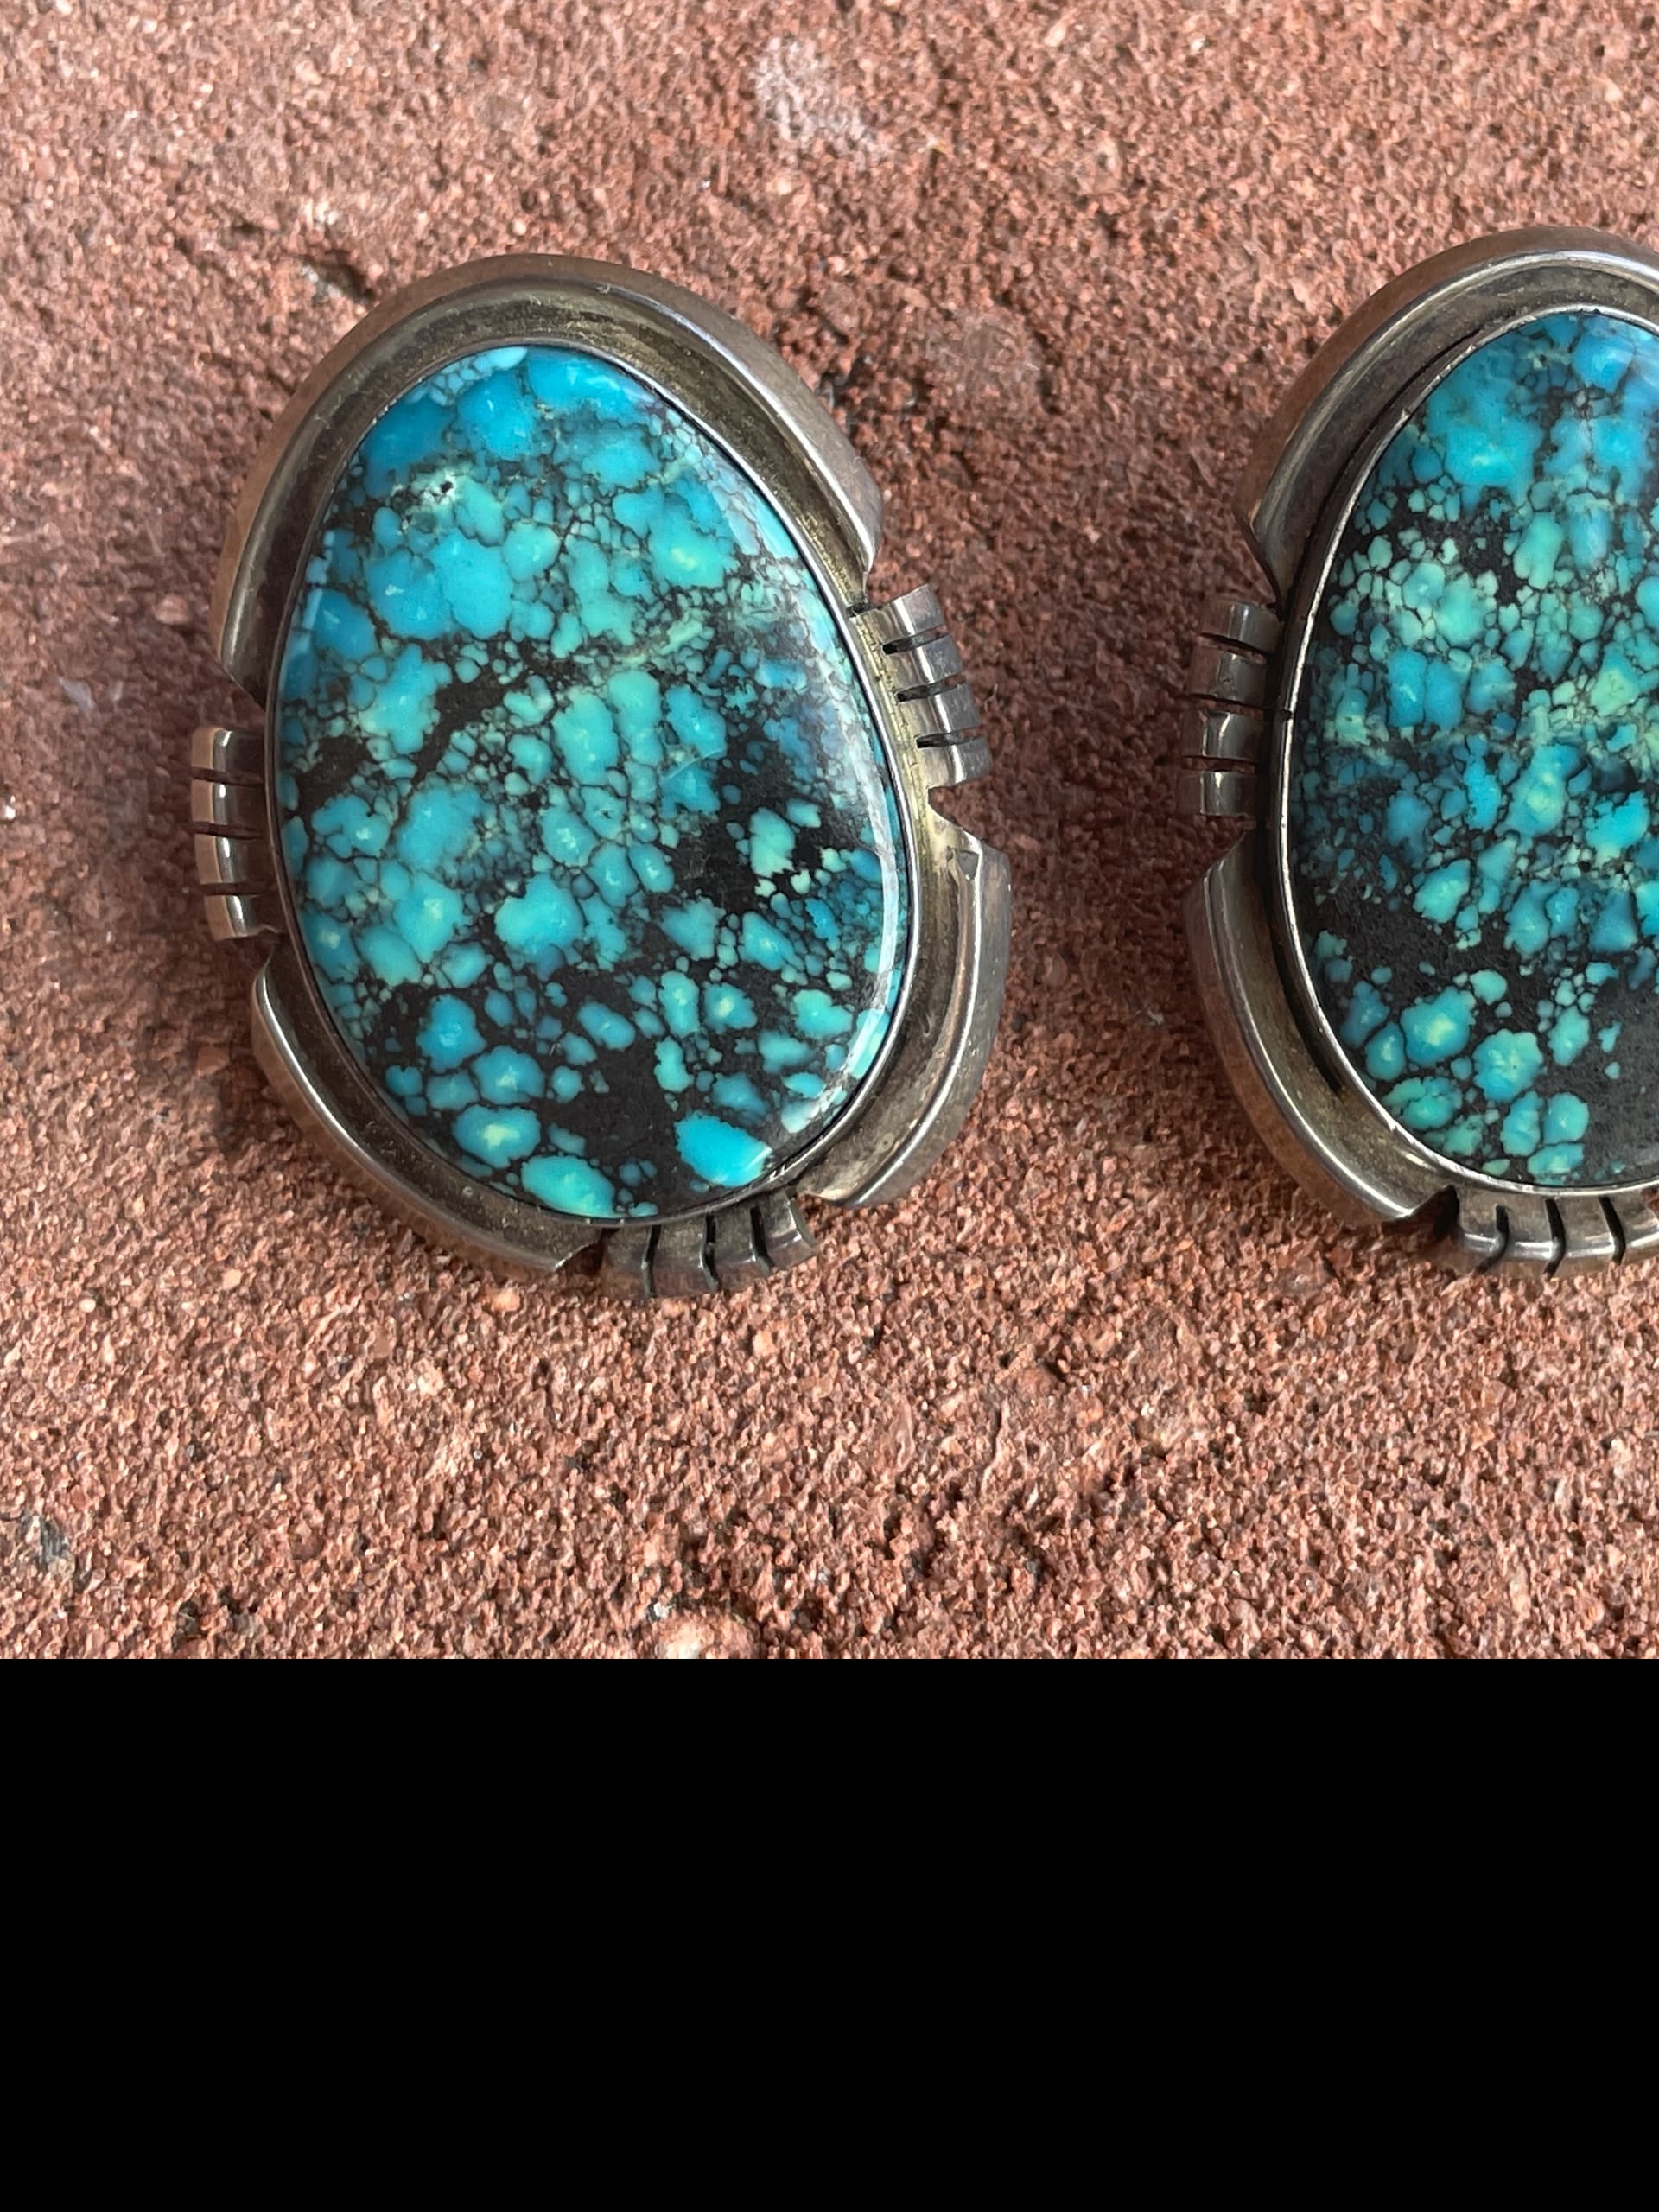 Real turquoise - Real vs. Fake - Turquoise People